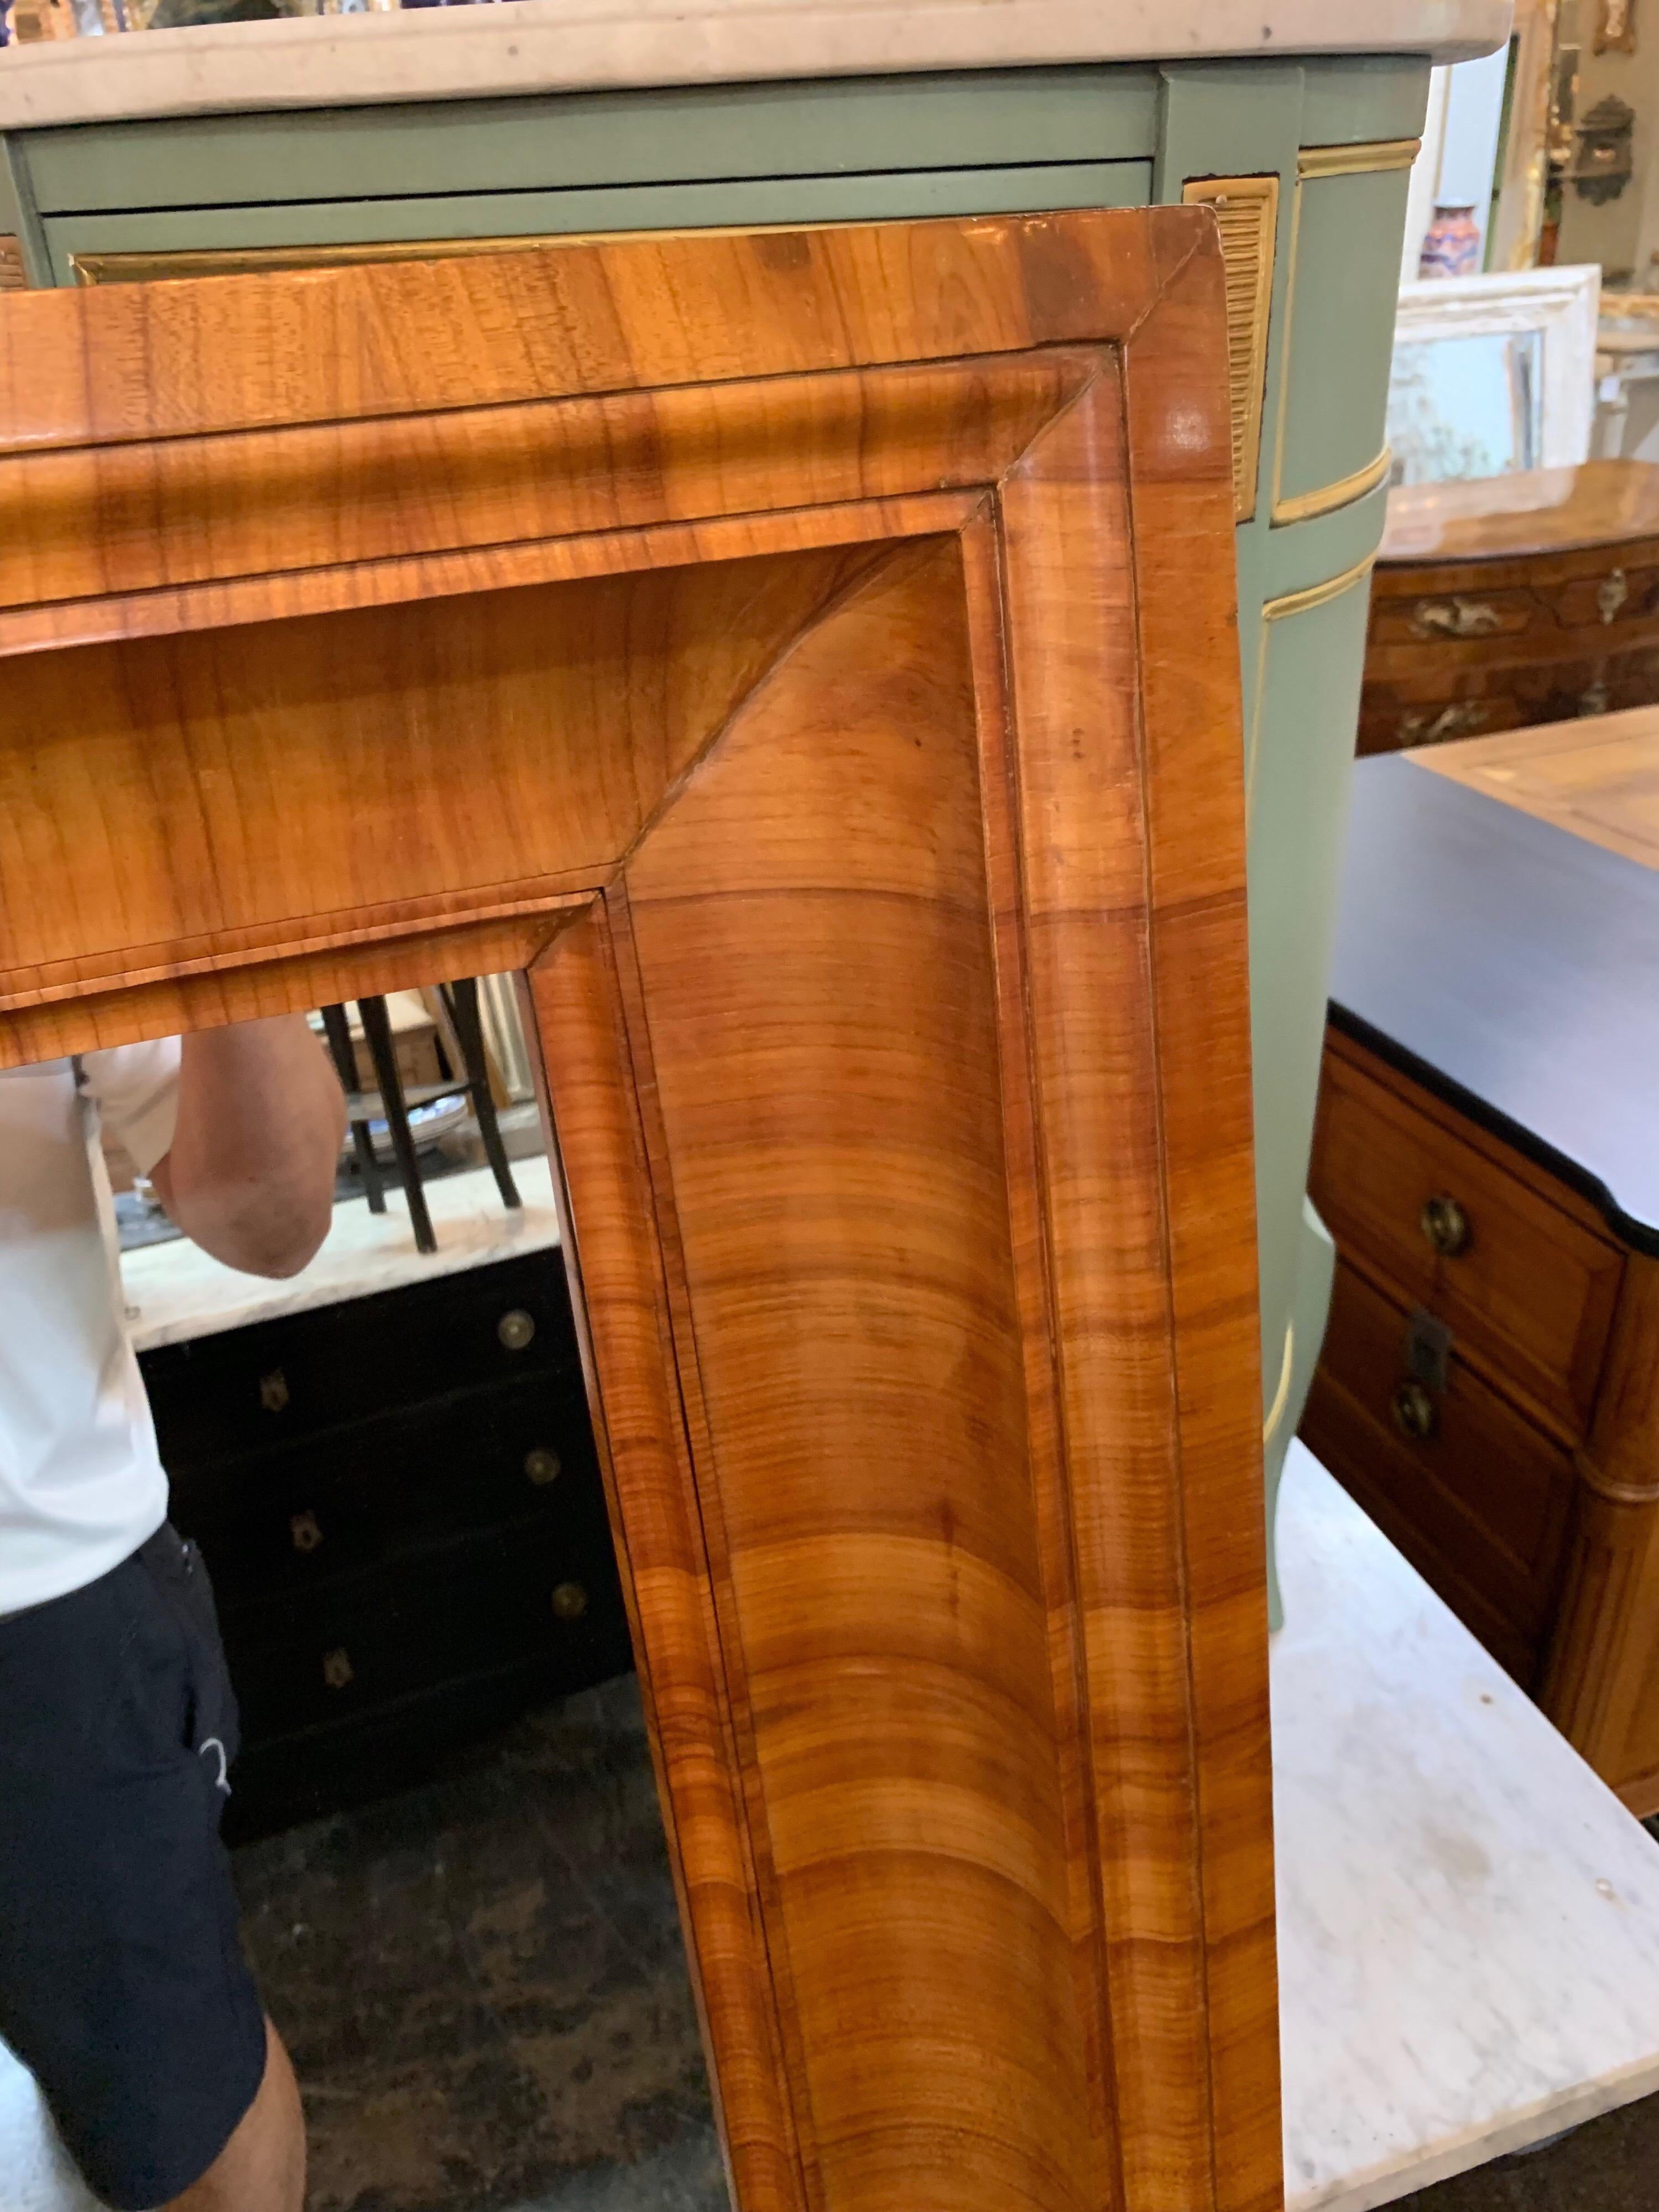 Very handsome antique Biedermeier mirror made of solid cherry wood. Beautiful wood grain on this substantial piece that would be a focal point in any room.